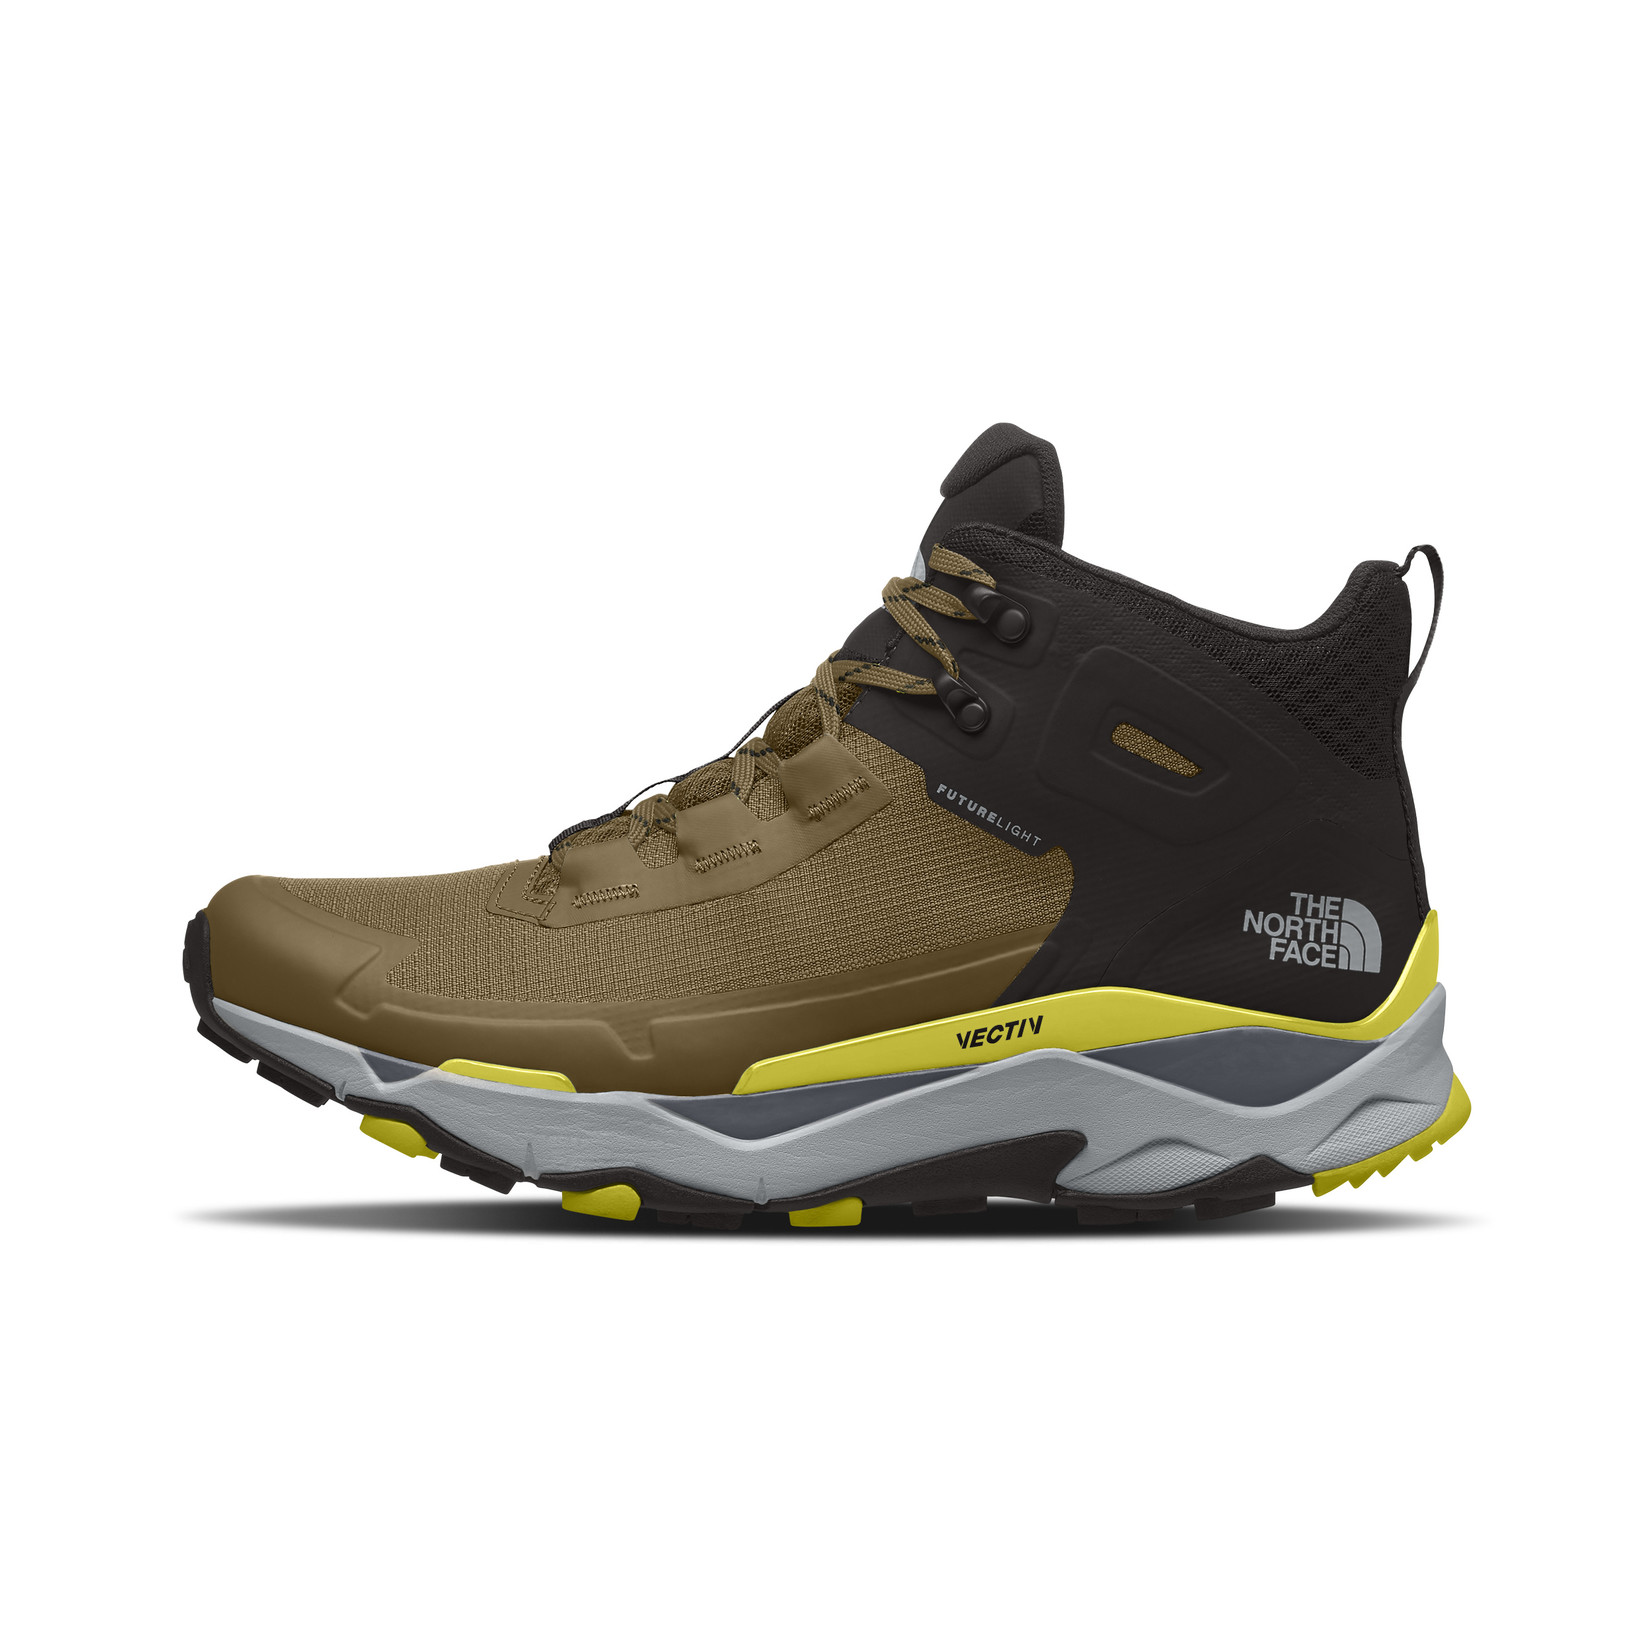 The North Face The North Face Men's Vectiv Exploris Mid Futurelight Hiking Shoes